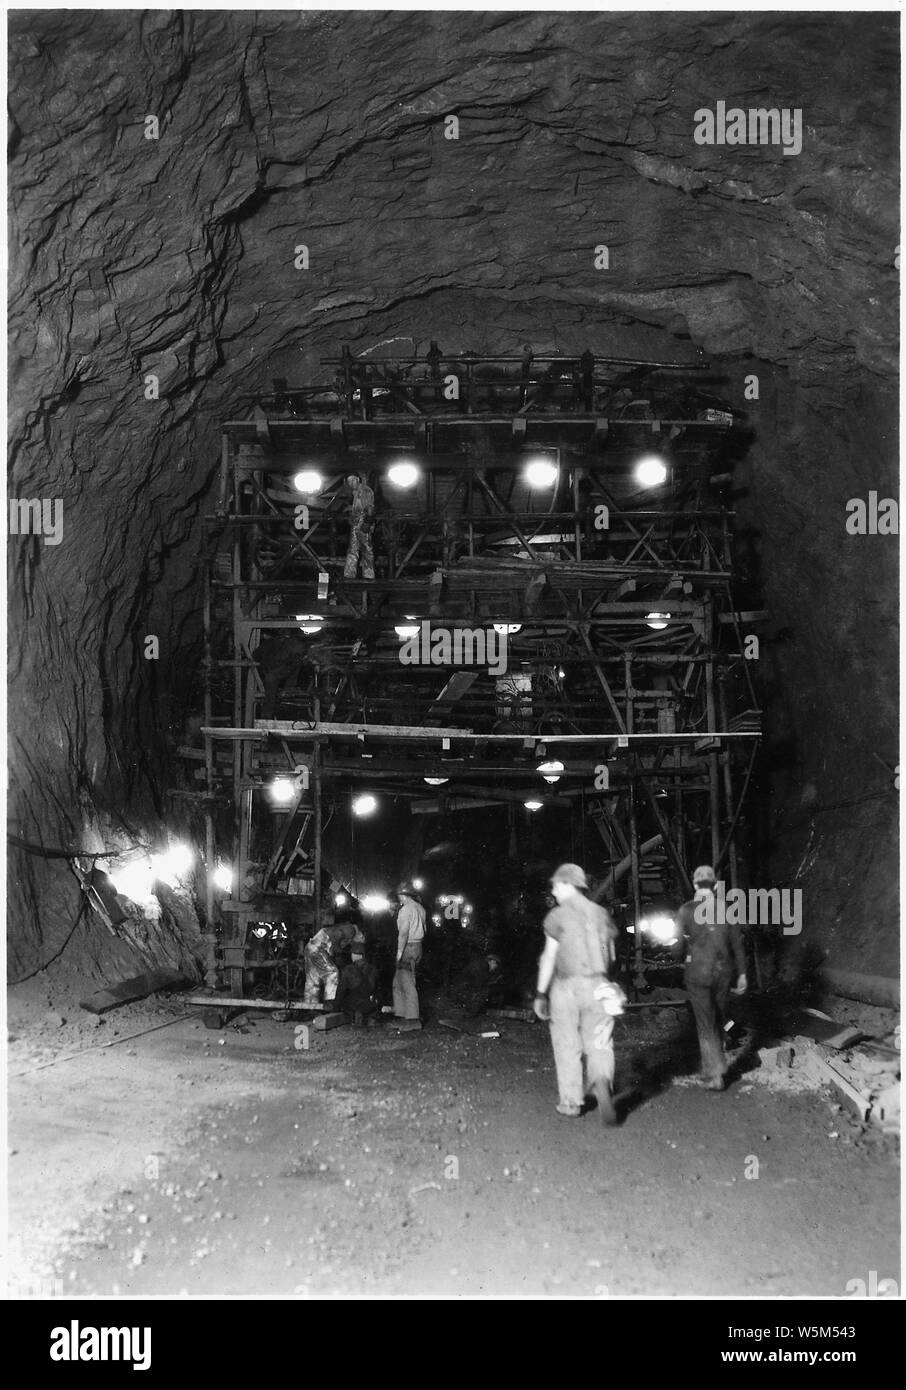 Drilling jumbo used in upper 36 feet of 41-foot diameter upper penstock header. This view shows the drilling face.; Scope and content:  Photograph from Volume Two of a series of photo albums documenting the construction of Hoover Dam, Boulder City, Nevada. Stock Photo